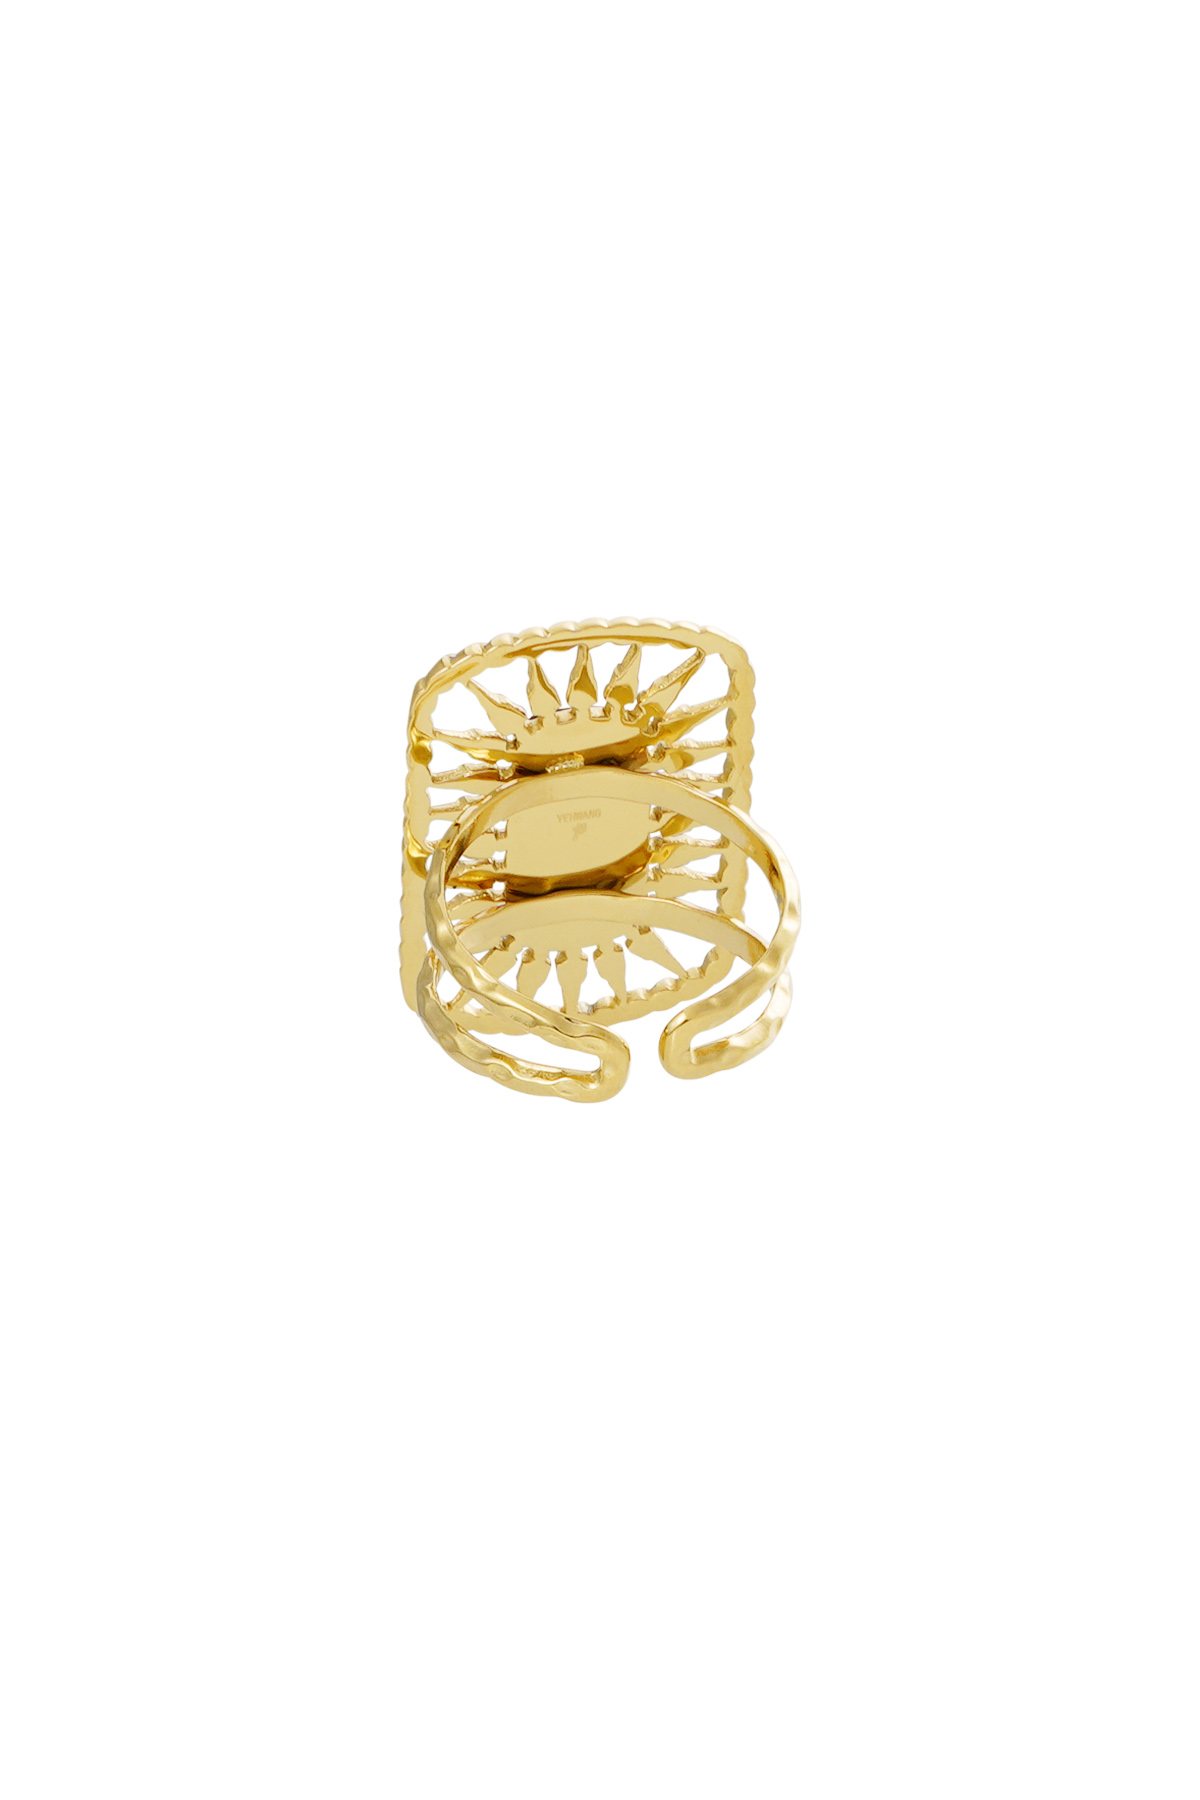 Ring long stone - gold/beige Picture2